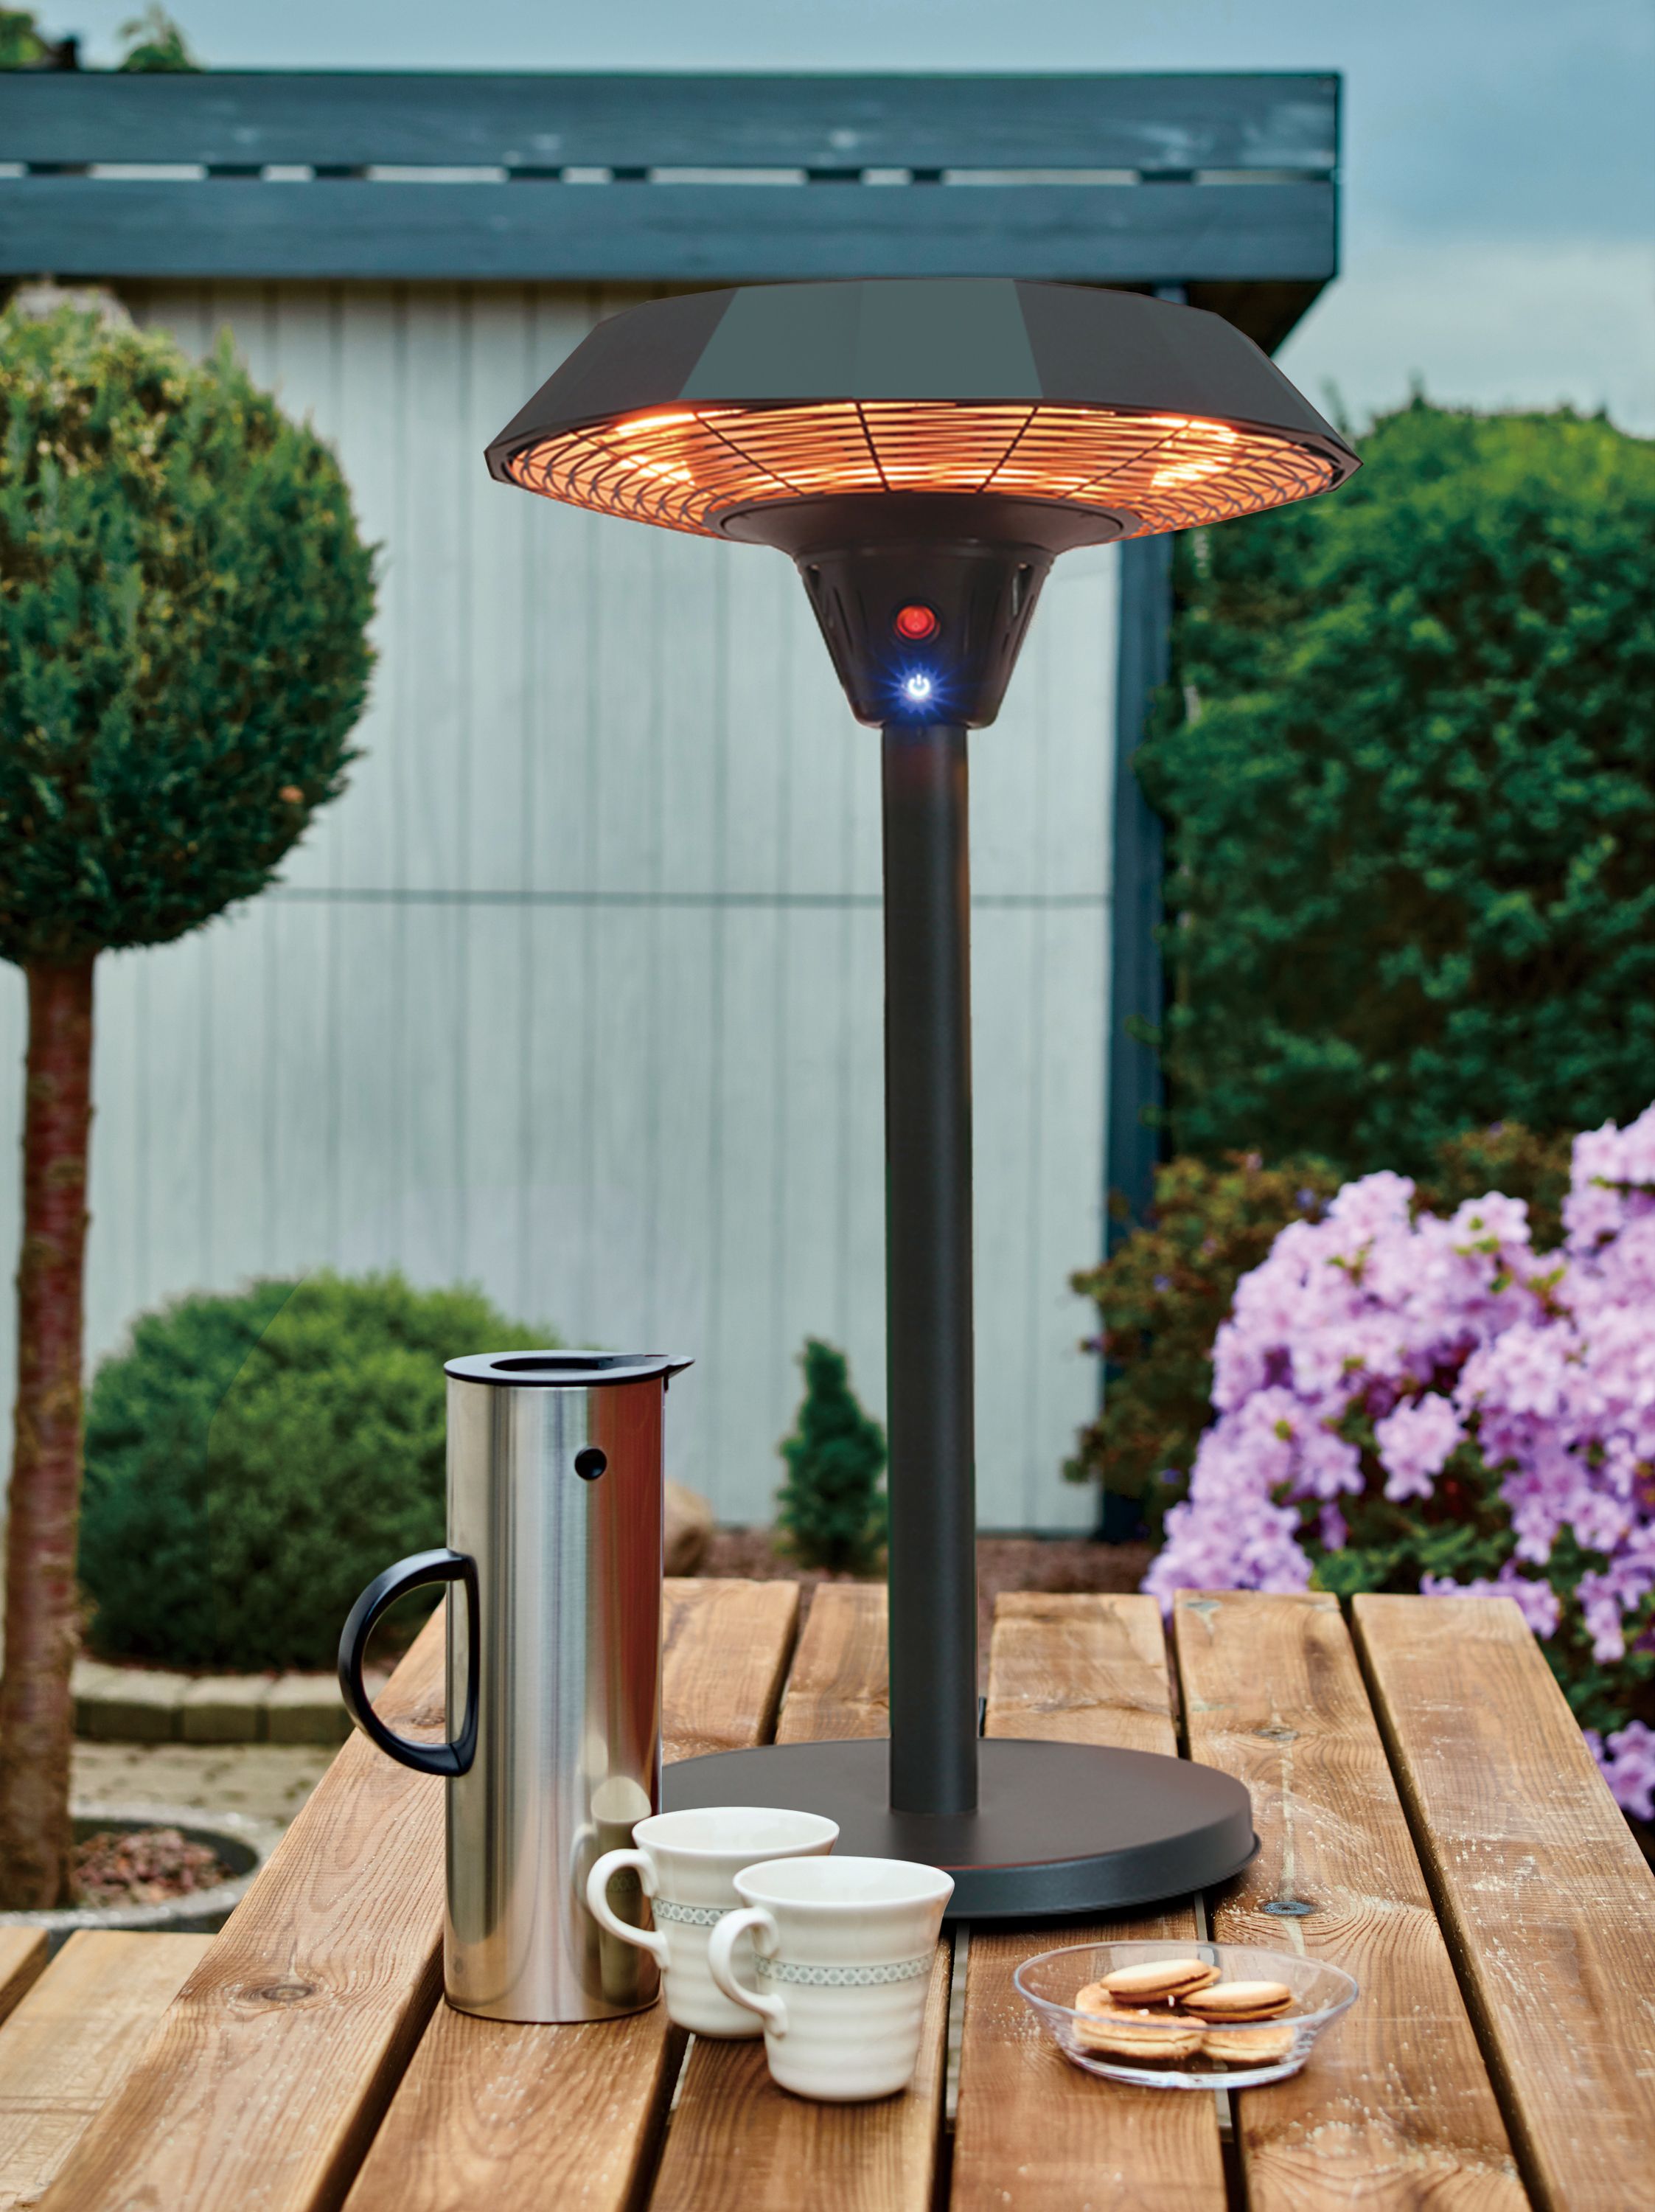 Image of Charles Bentley 2000W Electric Table Top Outdoor Patio Heater